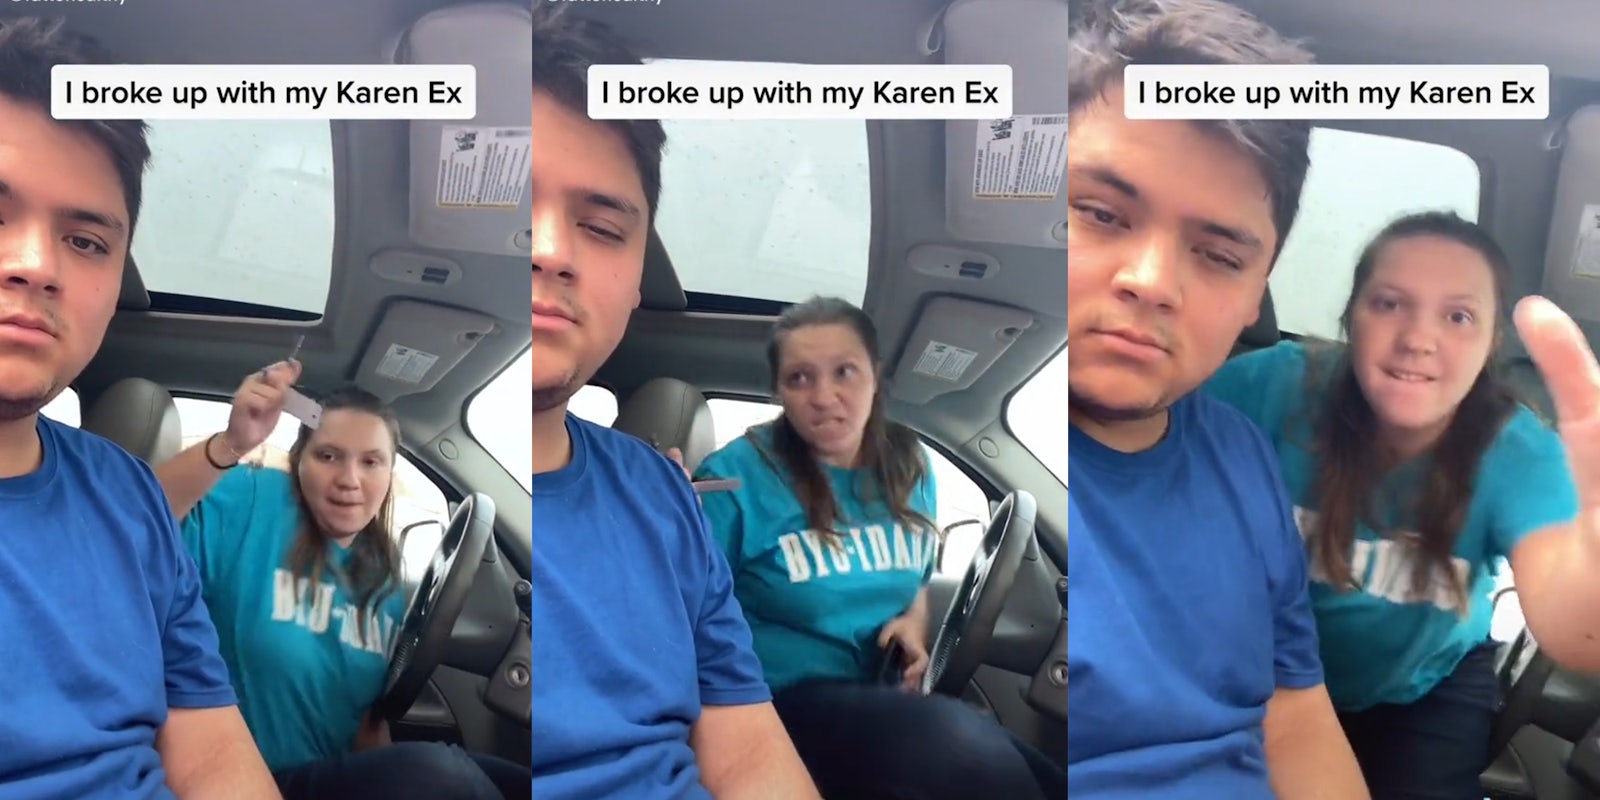 woman trying to attack man with car keys with caption 'I broke up with my Karen Ex'